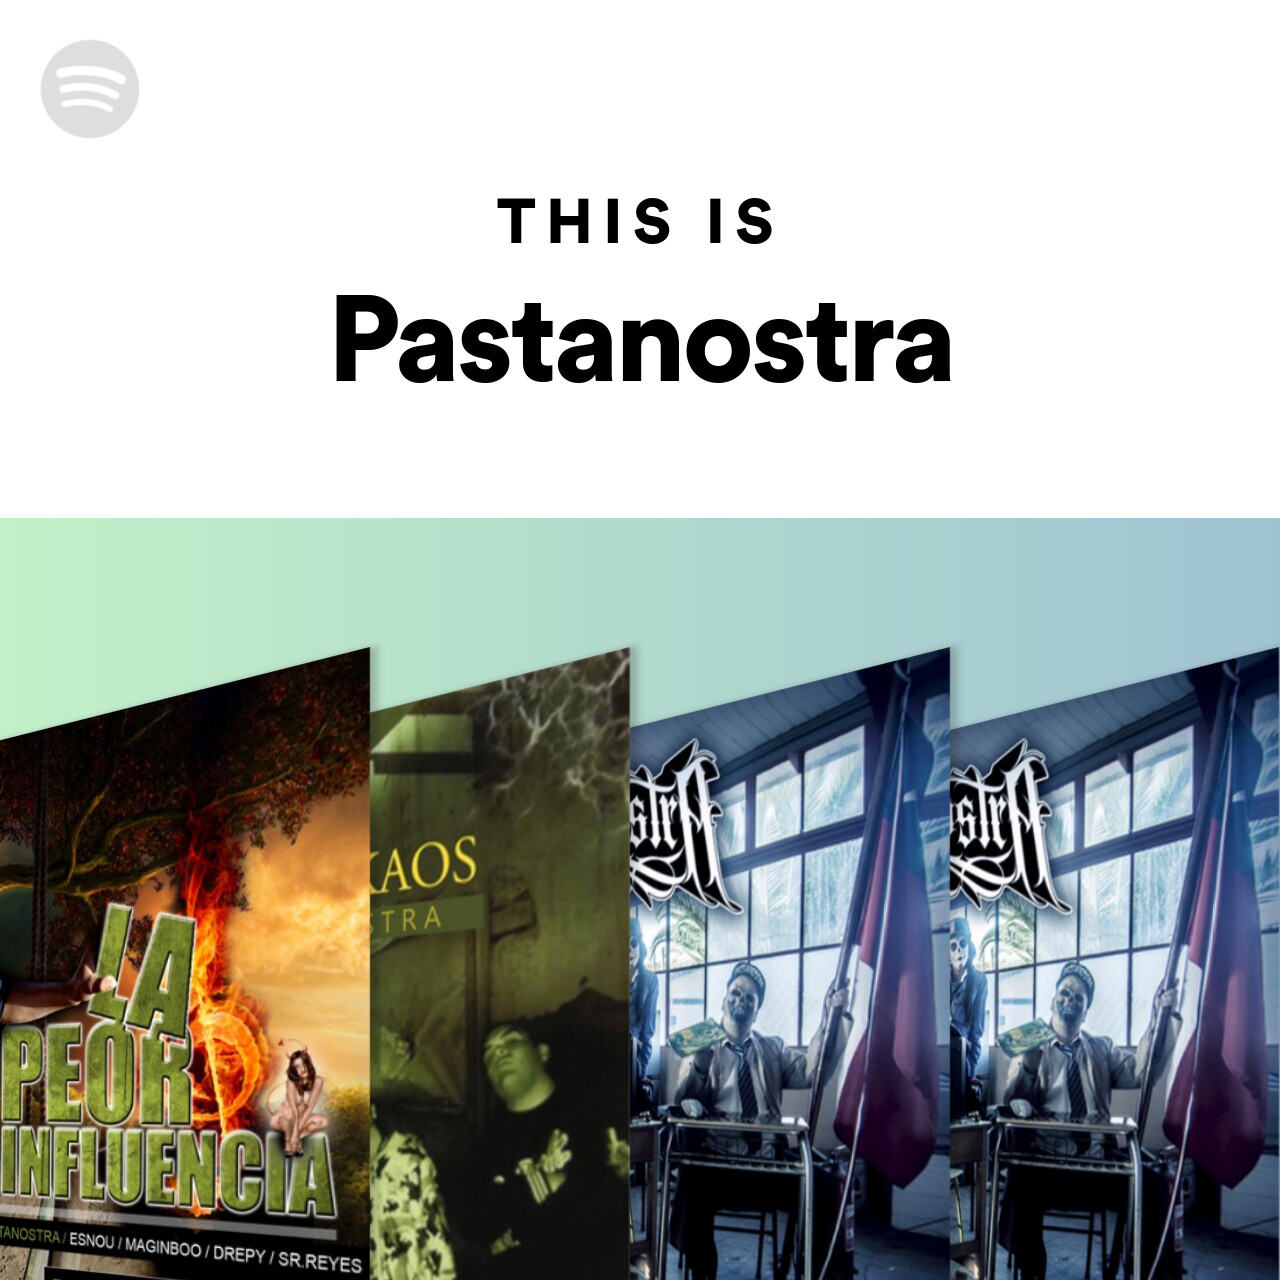 This Is Pastanostra